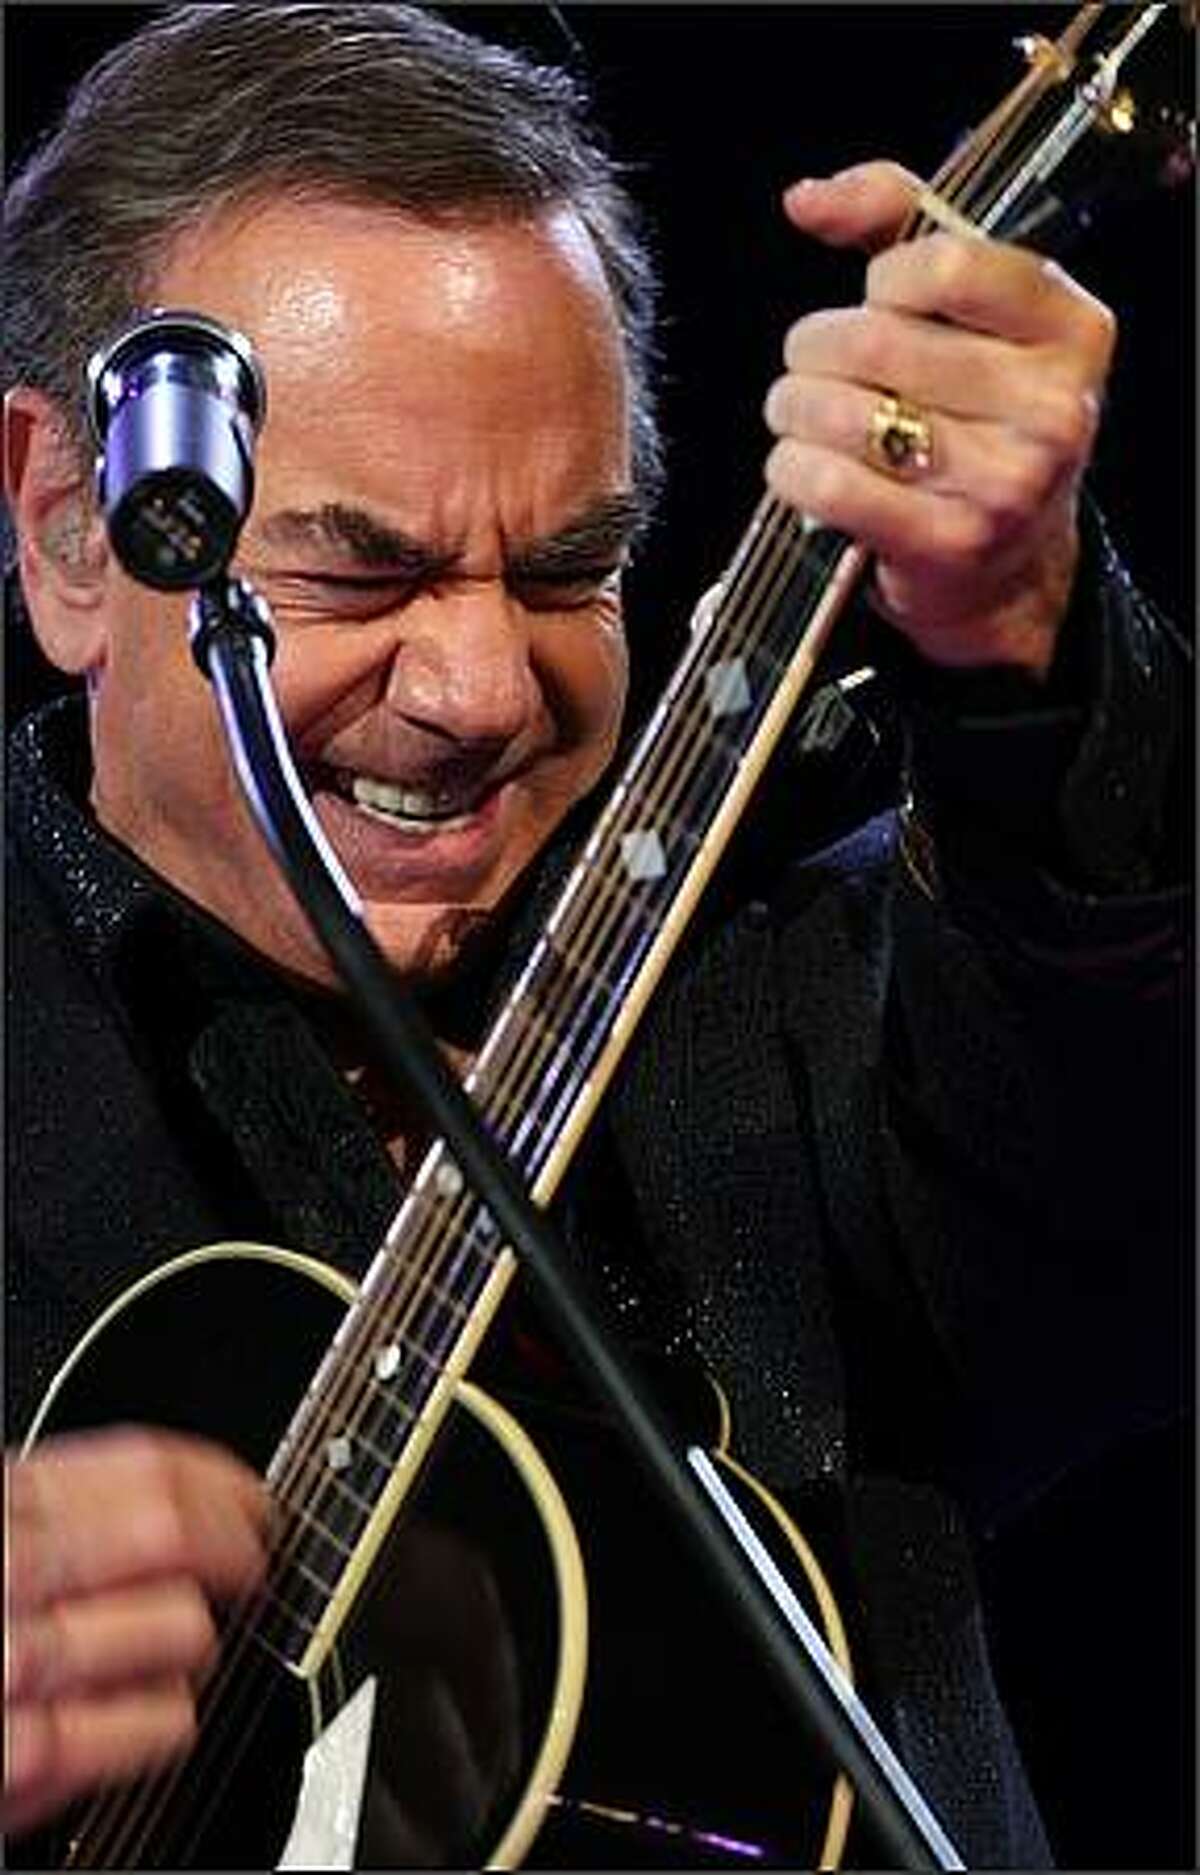 Neil Diamond gives his guitar a workout at Key Arena on Wednesday night.